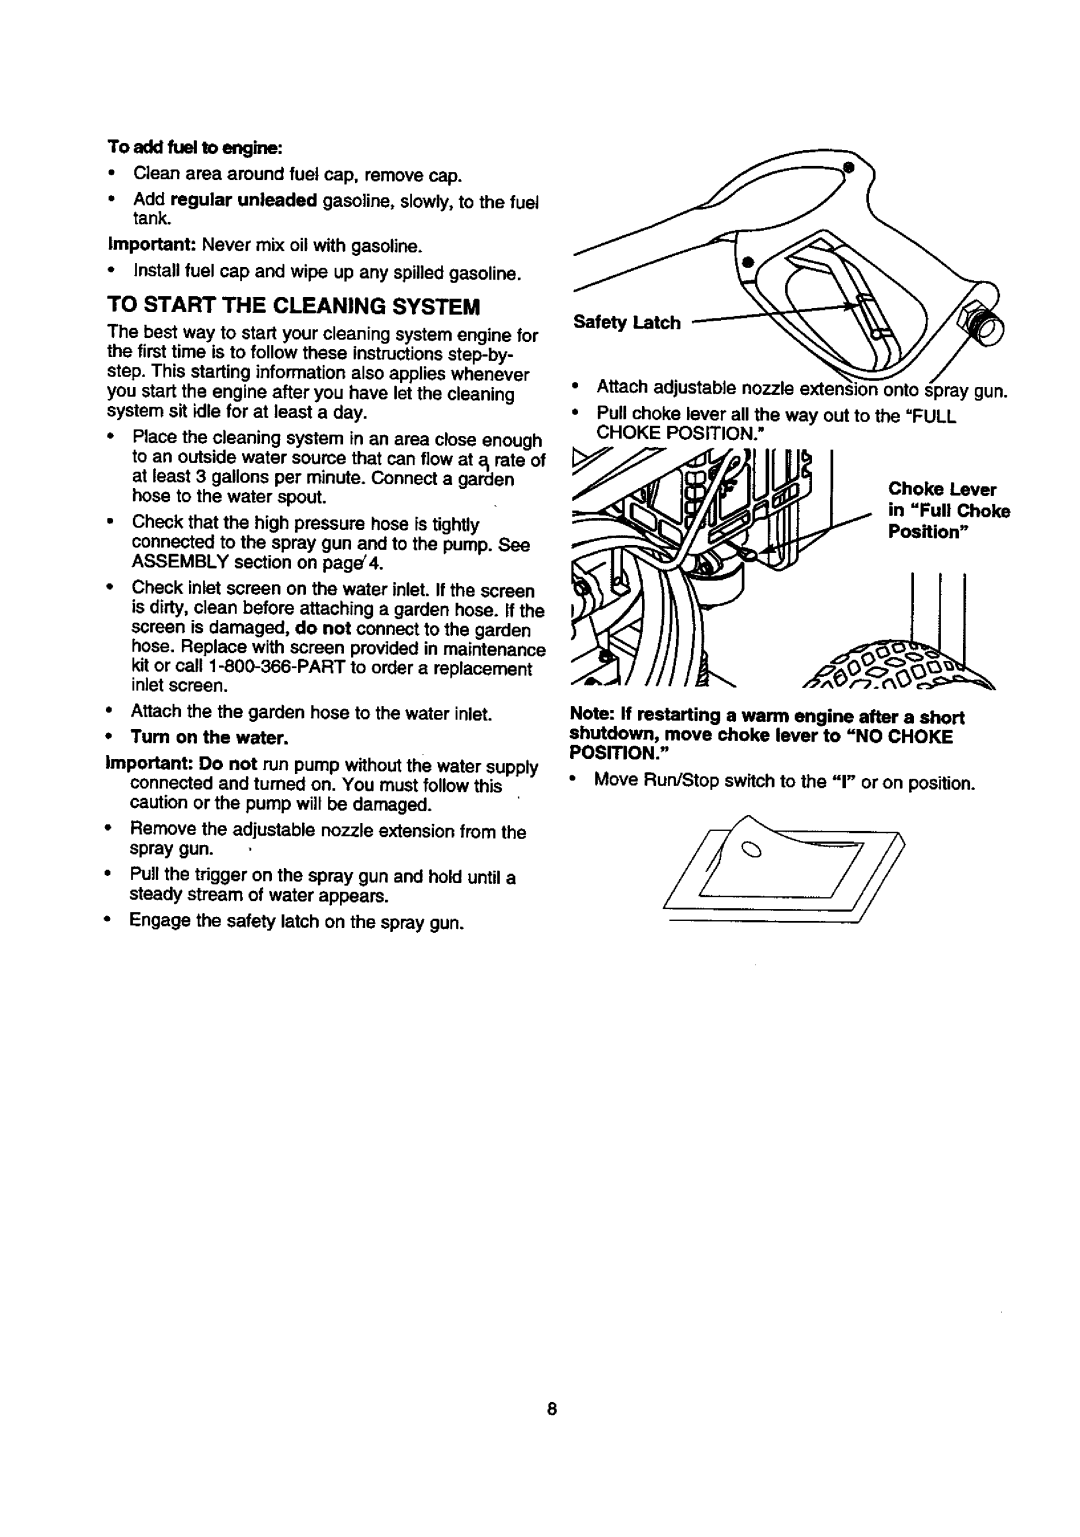 Craftsman 580.768030 operating instructions Toaddfueltoengine, To Start The Cleaning System 